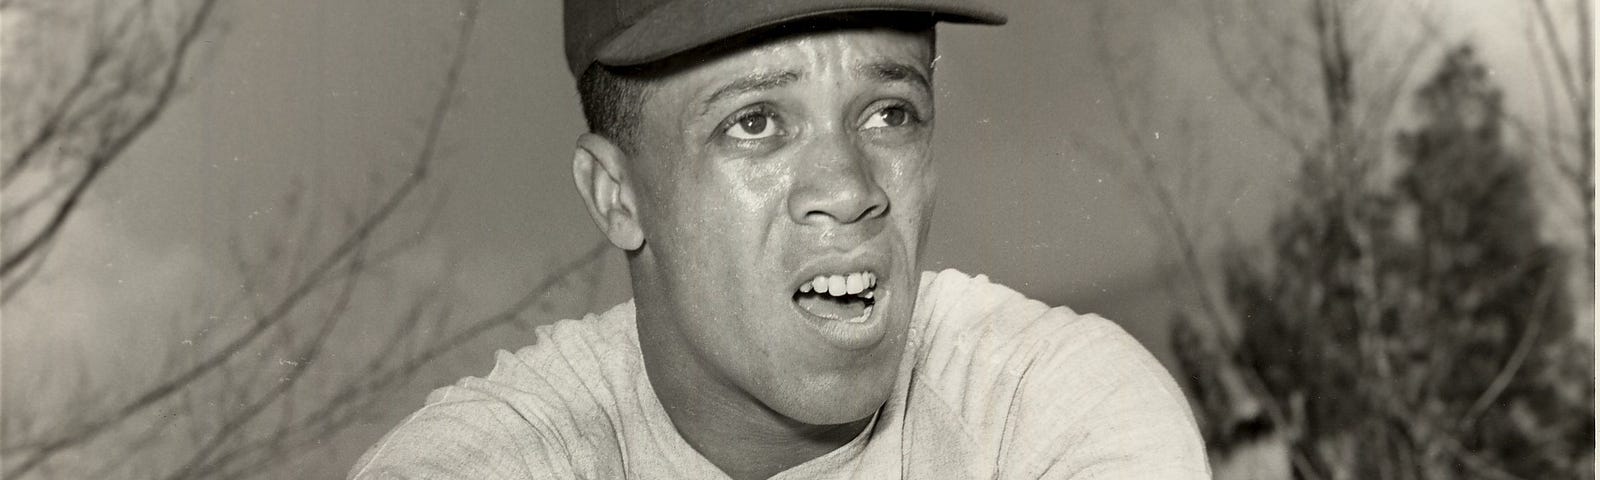 The Dodgers' hallowed records: Maury Wills' stolen-base marks